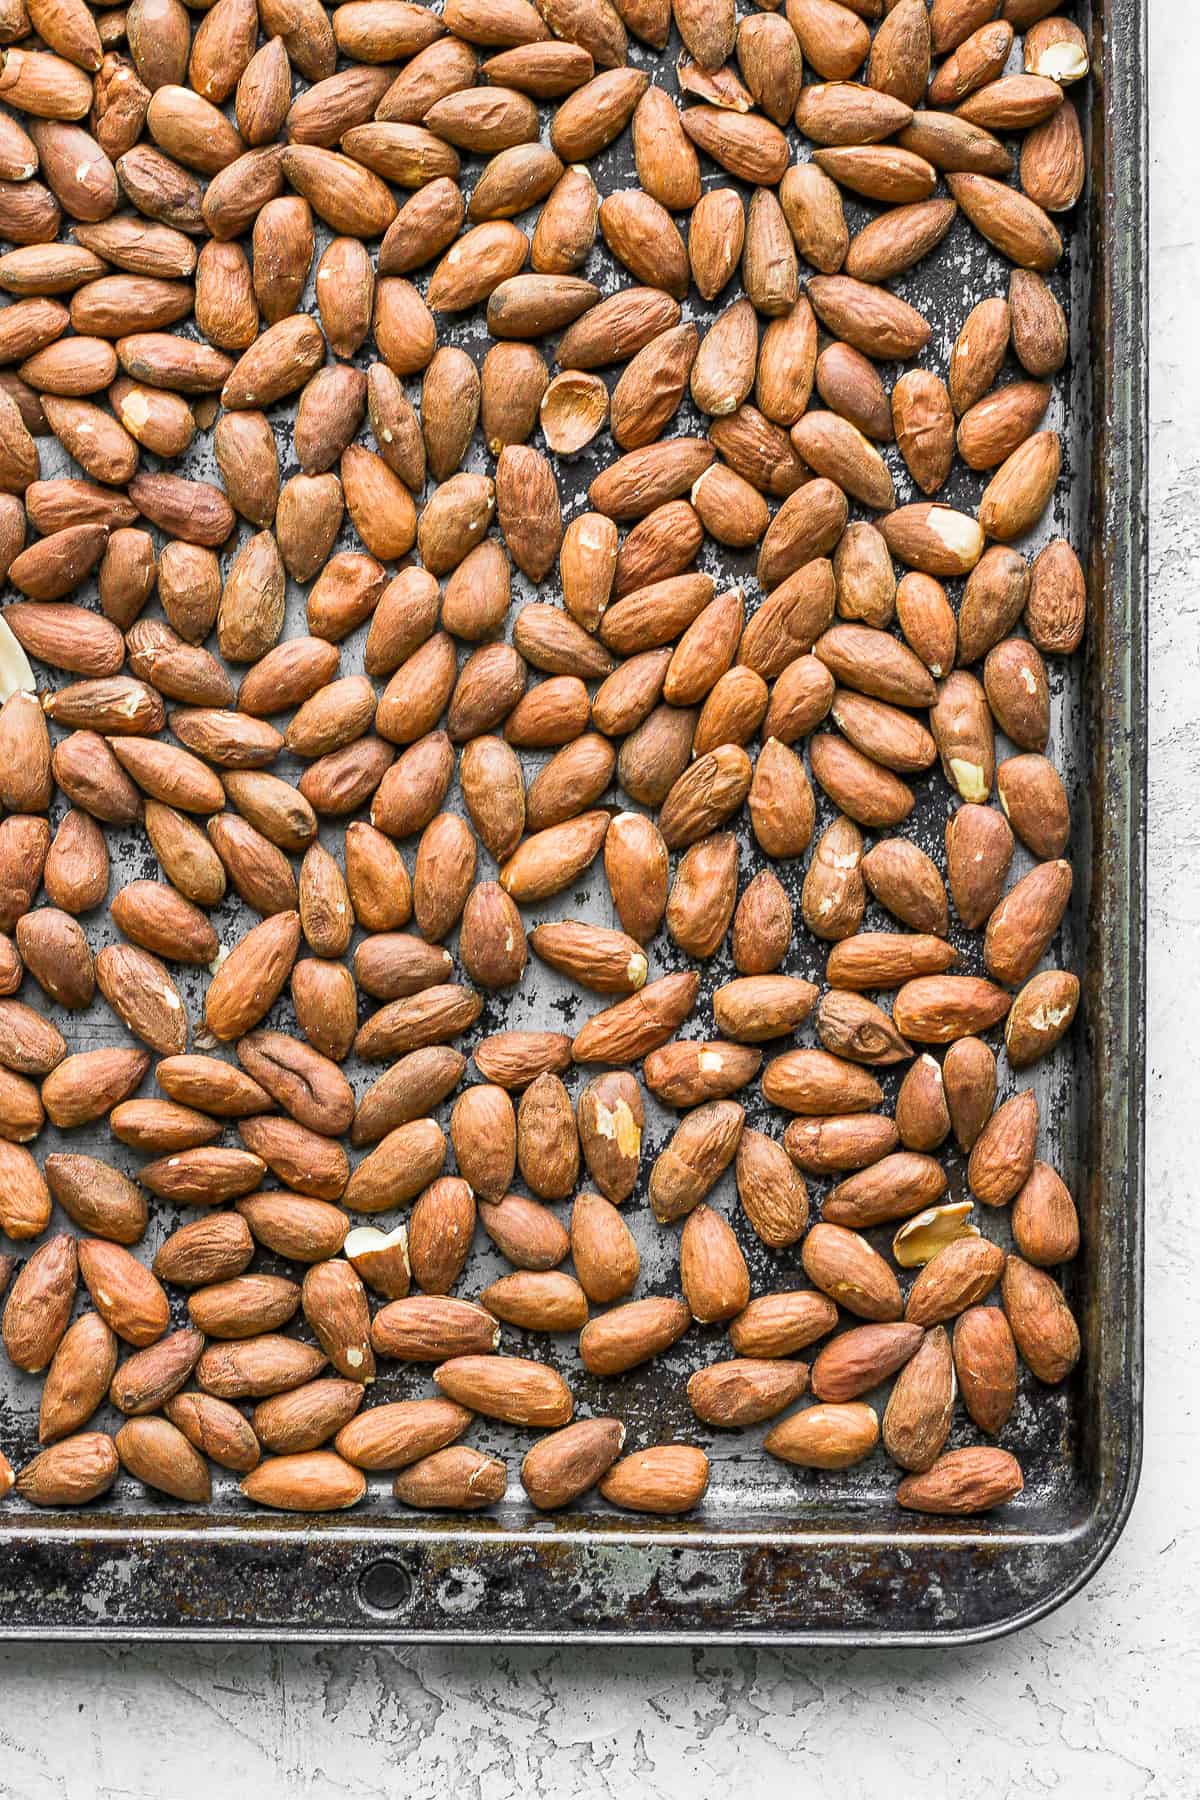 Almonds on a tray before roasting